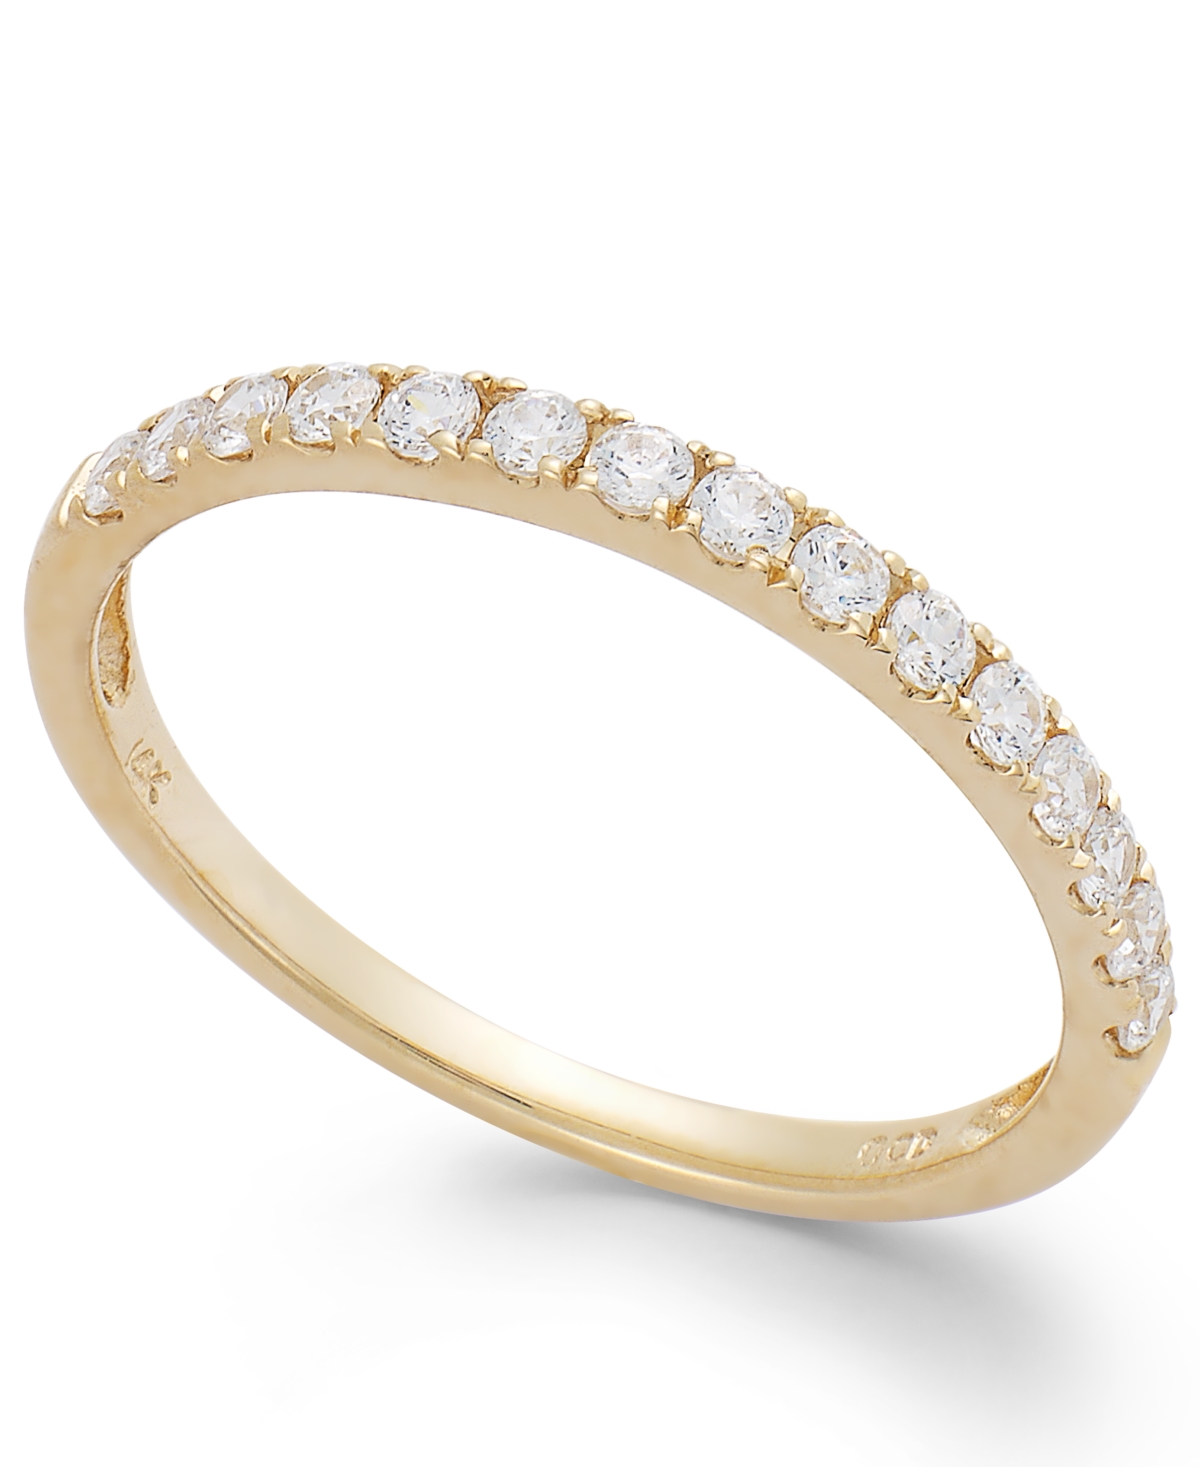 Arabella Cubic Zirconia Wedding Band Ring (1 ct. t.w.) in 14k White or Yellow Gold